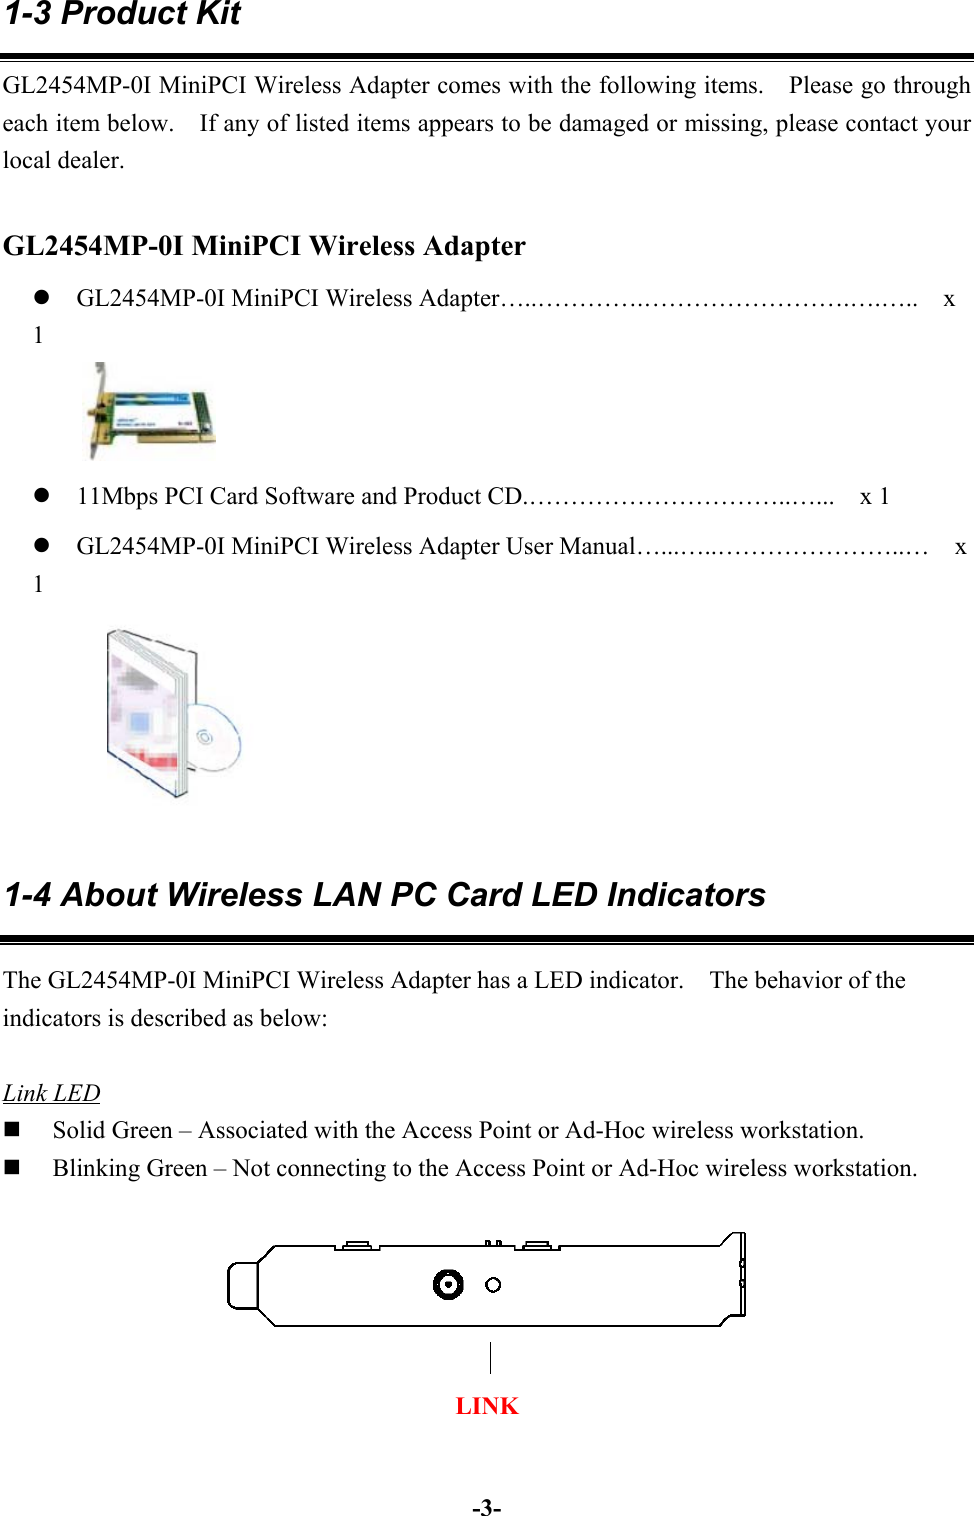 -3-1-3 Product KitGL2454MP-0I MiniPCI Wireless Adapter comes with the following items.    Please go througheach item below.    If any of listed items appears to be damaged or missing, please contact yourlocal dealer. GL2454MP-0I MiniPCI Wireless Adapterz GL2454MP-0I MiniPCI Wireless Adapter…..………….…………………….….…..    x1z 11Mbps PCI Card Software and Product CD.…………………………..…...    x 1z GL2454MP-0I MiniPCI Wireless Adapter User Manual…...…..…………………..…    x11-4 About Wireless LAN PC Card LED IndicatorsThe GL2454MP-0I MiniPCI Wireless Adapter has a LED indicator.    The behavior of theindicators is described as below:Link LED Solid Green – Associated with the Access Point or Ad-Hoc wireless workstation. Blinking Green – Not connecting to the Access Point or Ad-Hoc wireless workstation.LINK